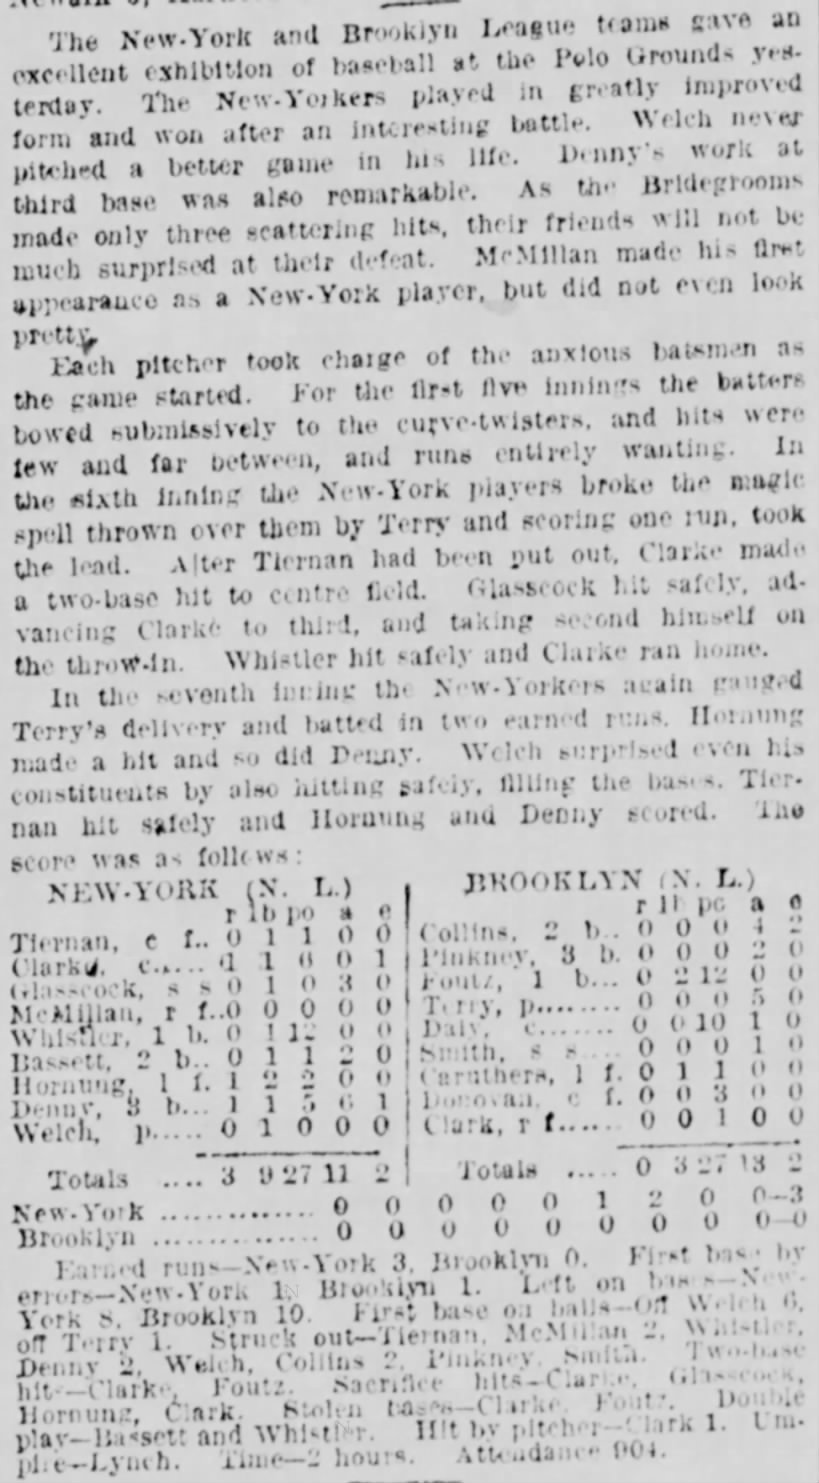 August 11, 1890
Mickey Welch's 300th Win